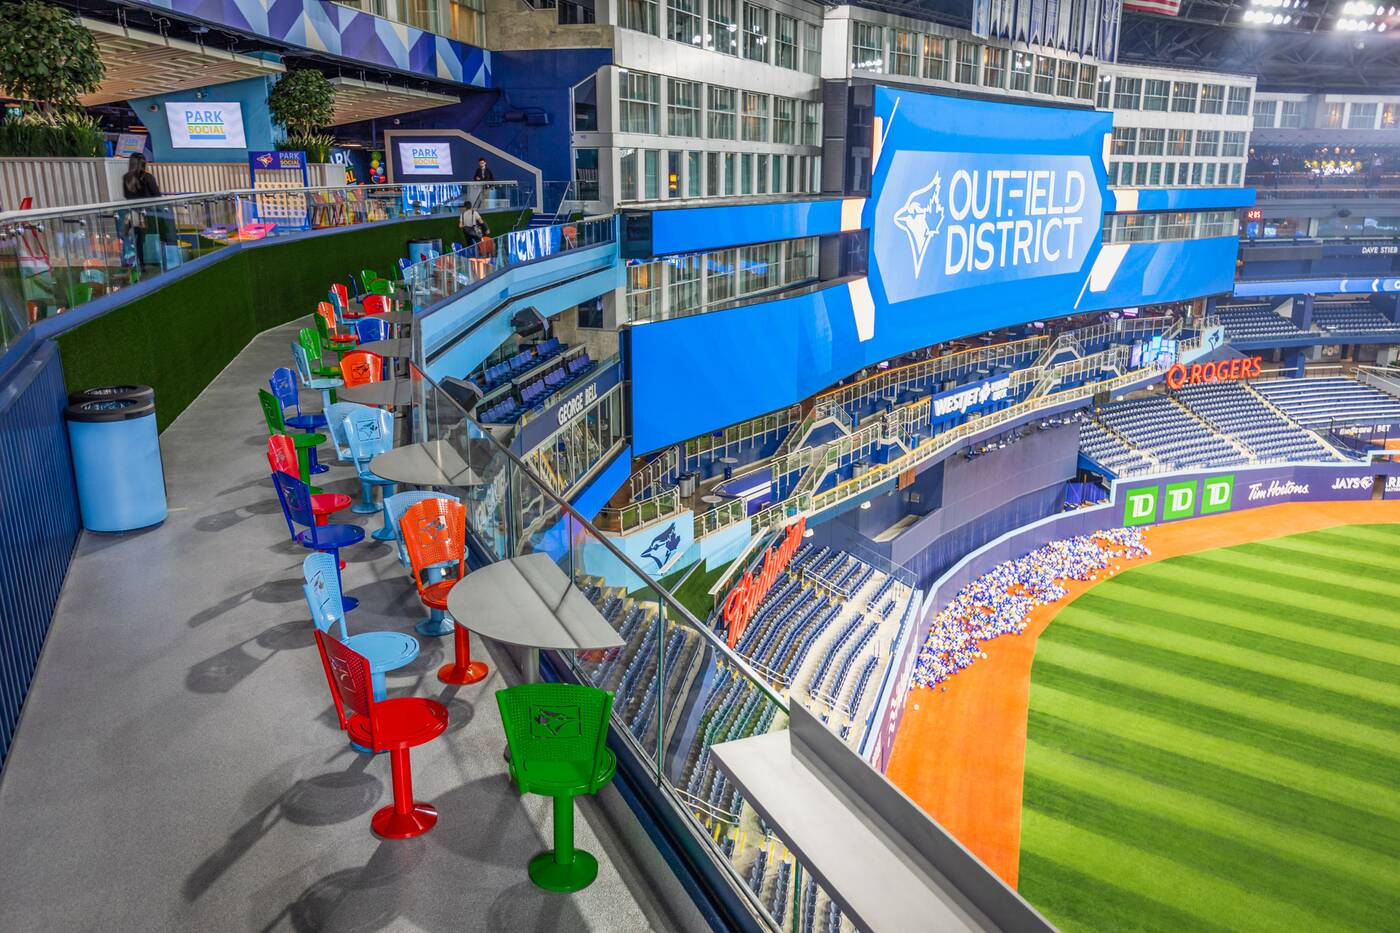 proposed rogers centre renovations